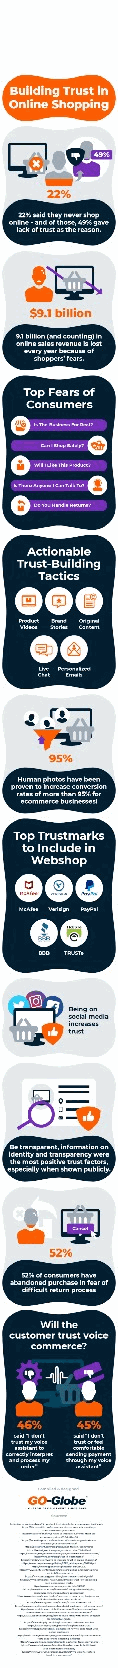 Building trust in online shopping [Infographic]